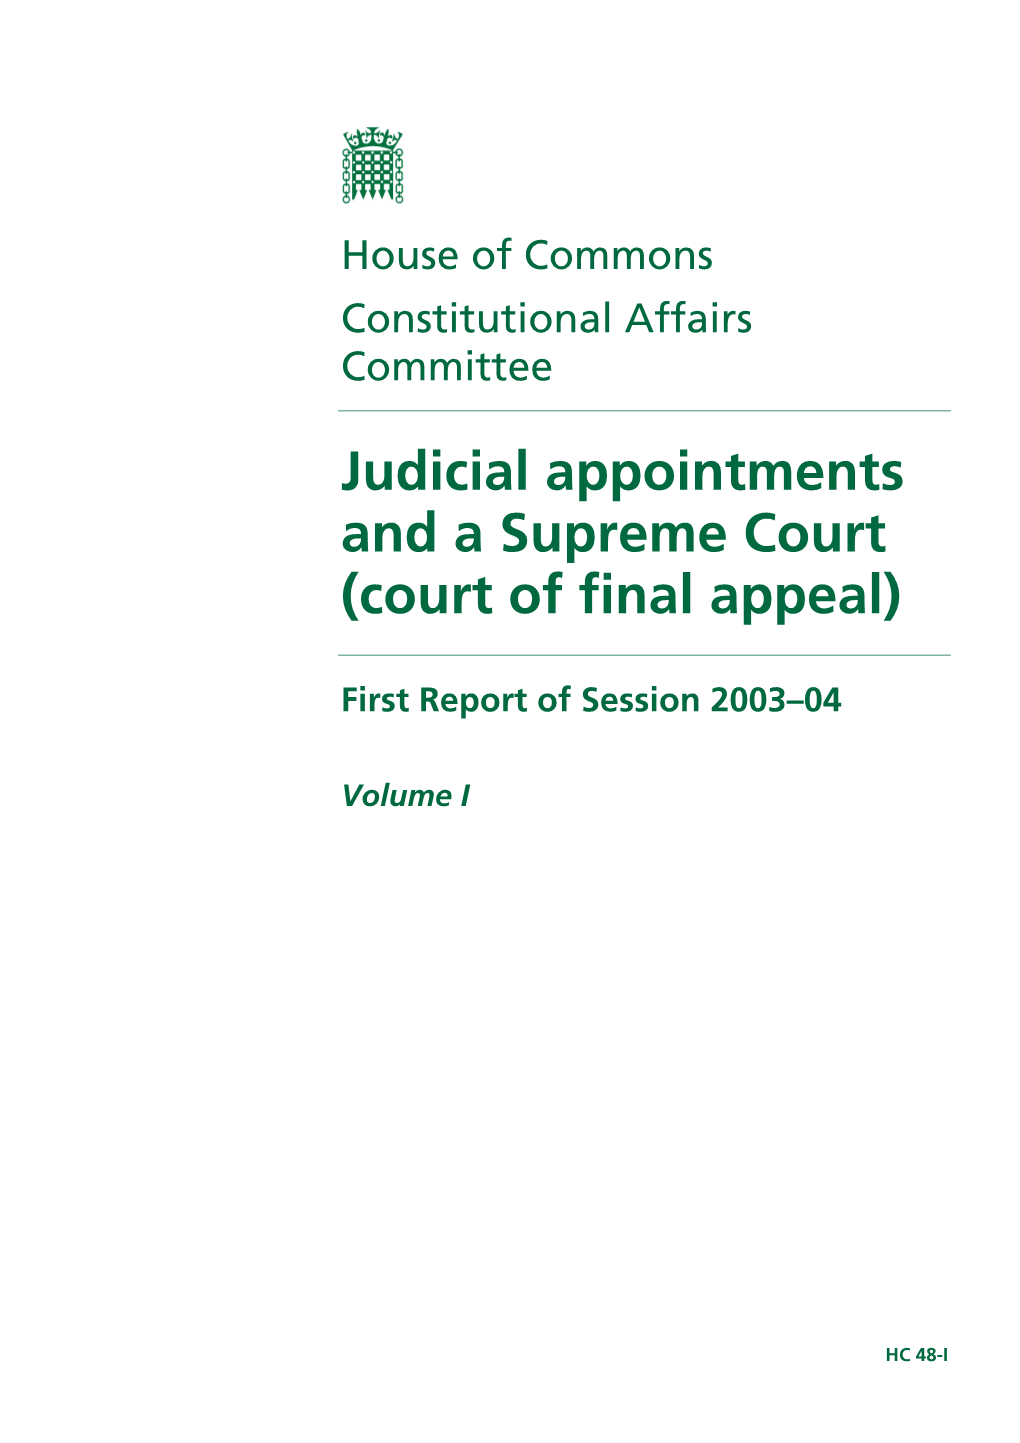 Judicial Appointments and a Supreme Court (Court of Final Appeal)